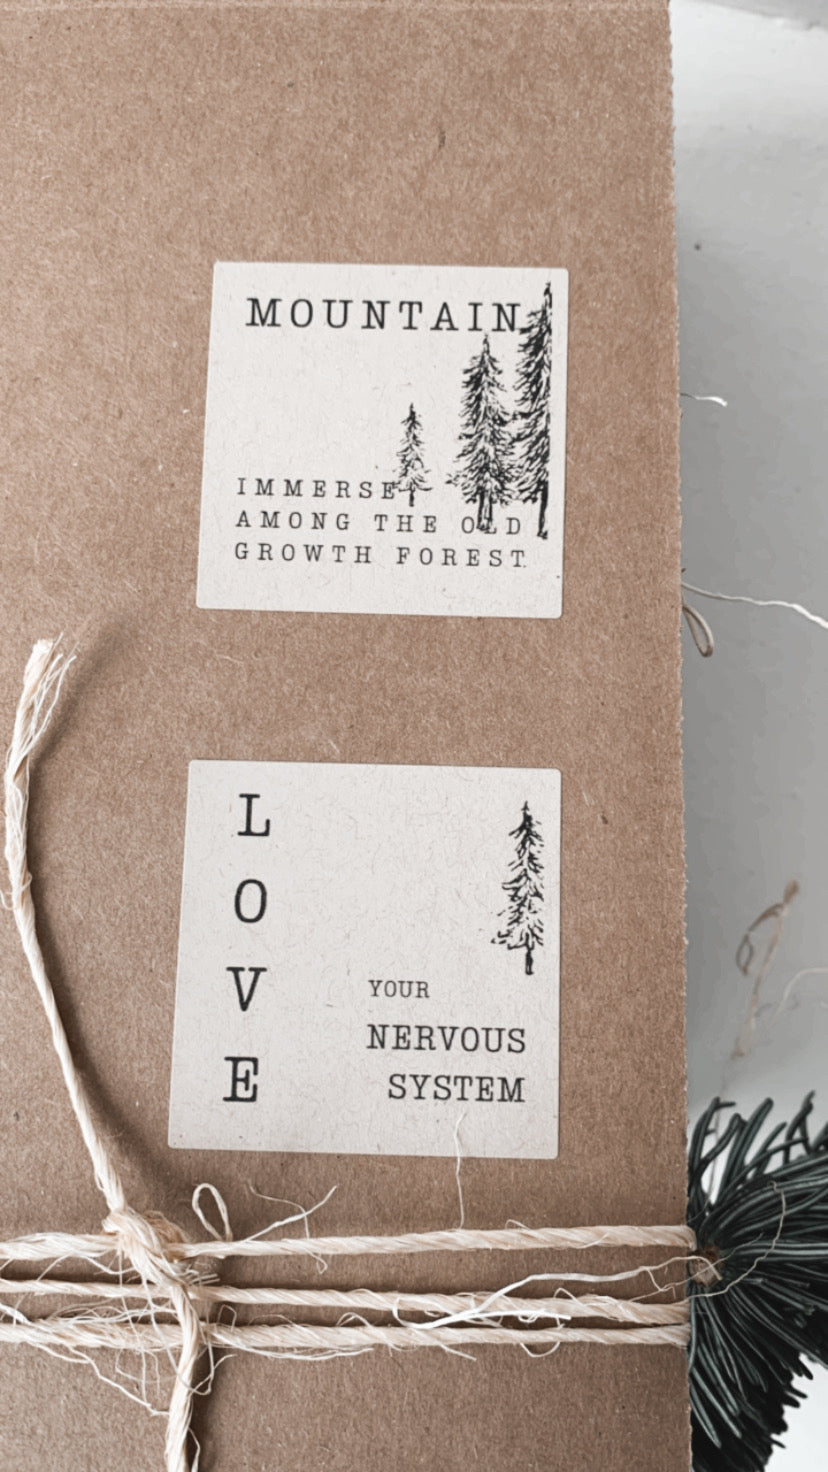 Mountain | Immerse yourself among the old growth forest